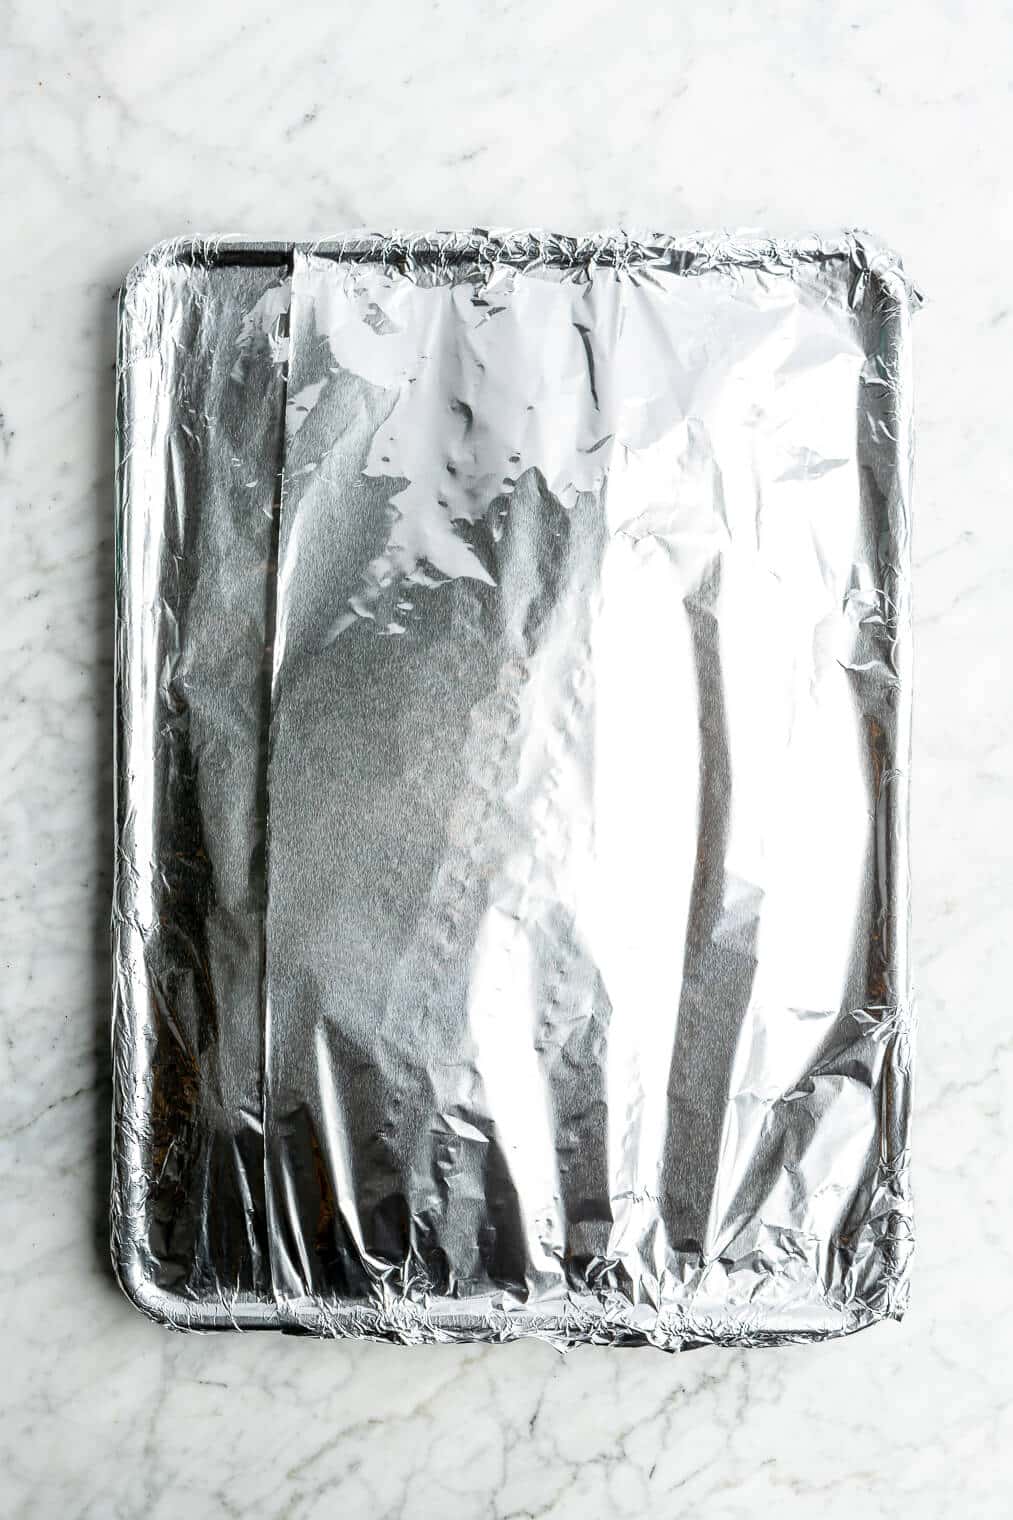 Pork spare ribs wrapped in aluminum foil on a sheet pan.